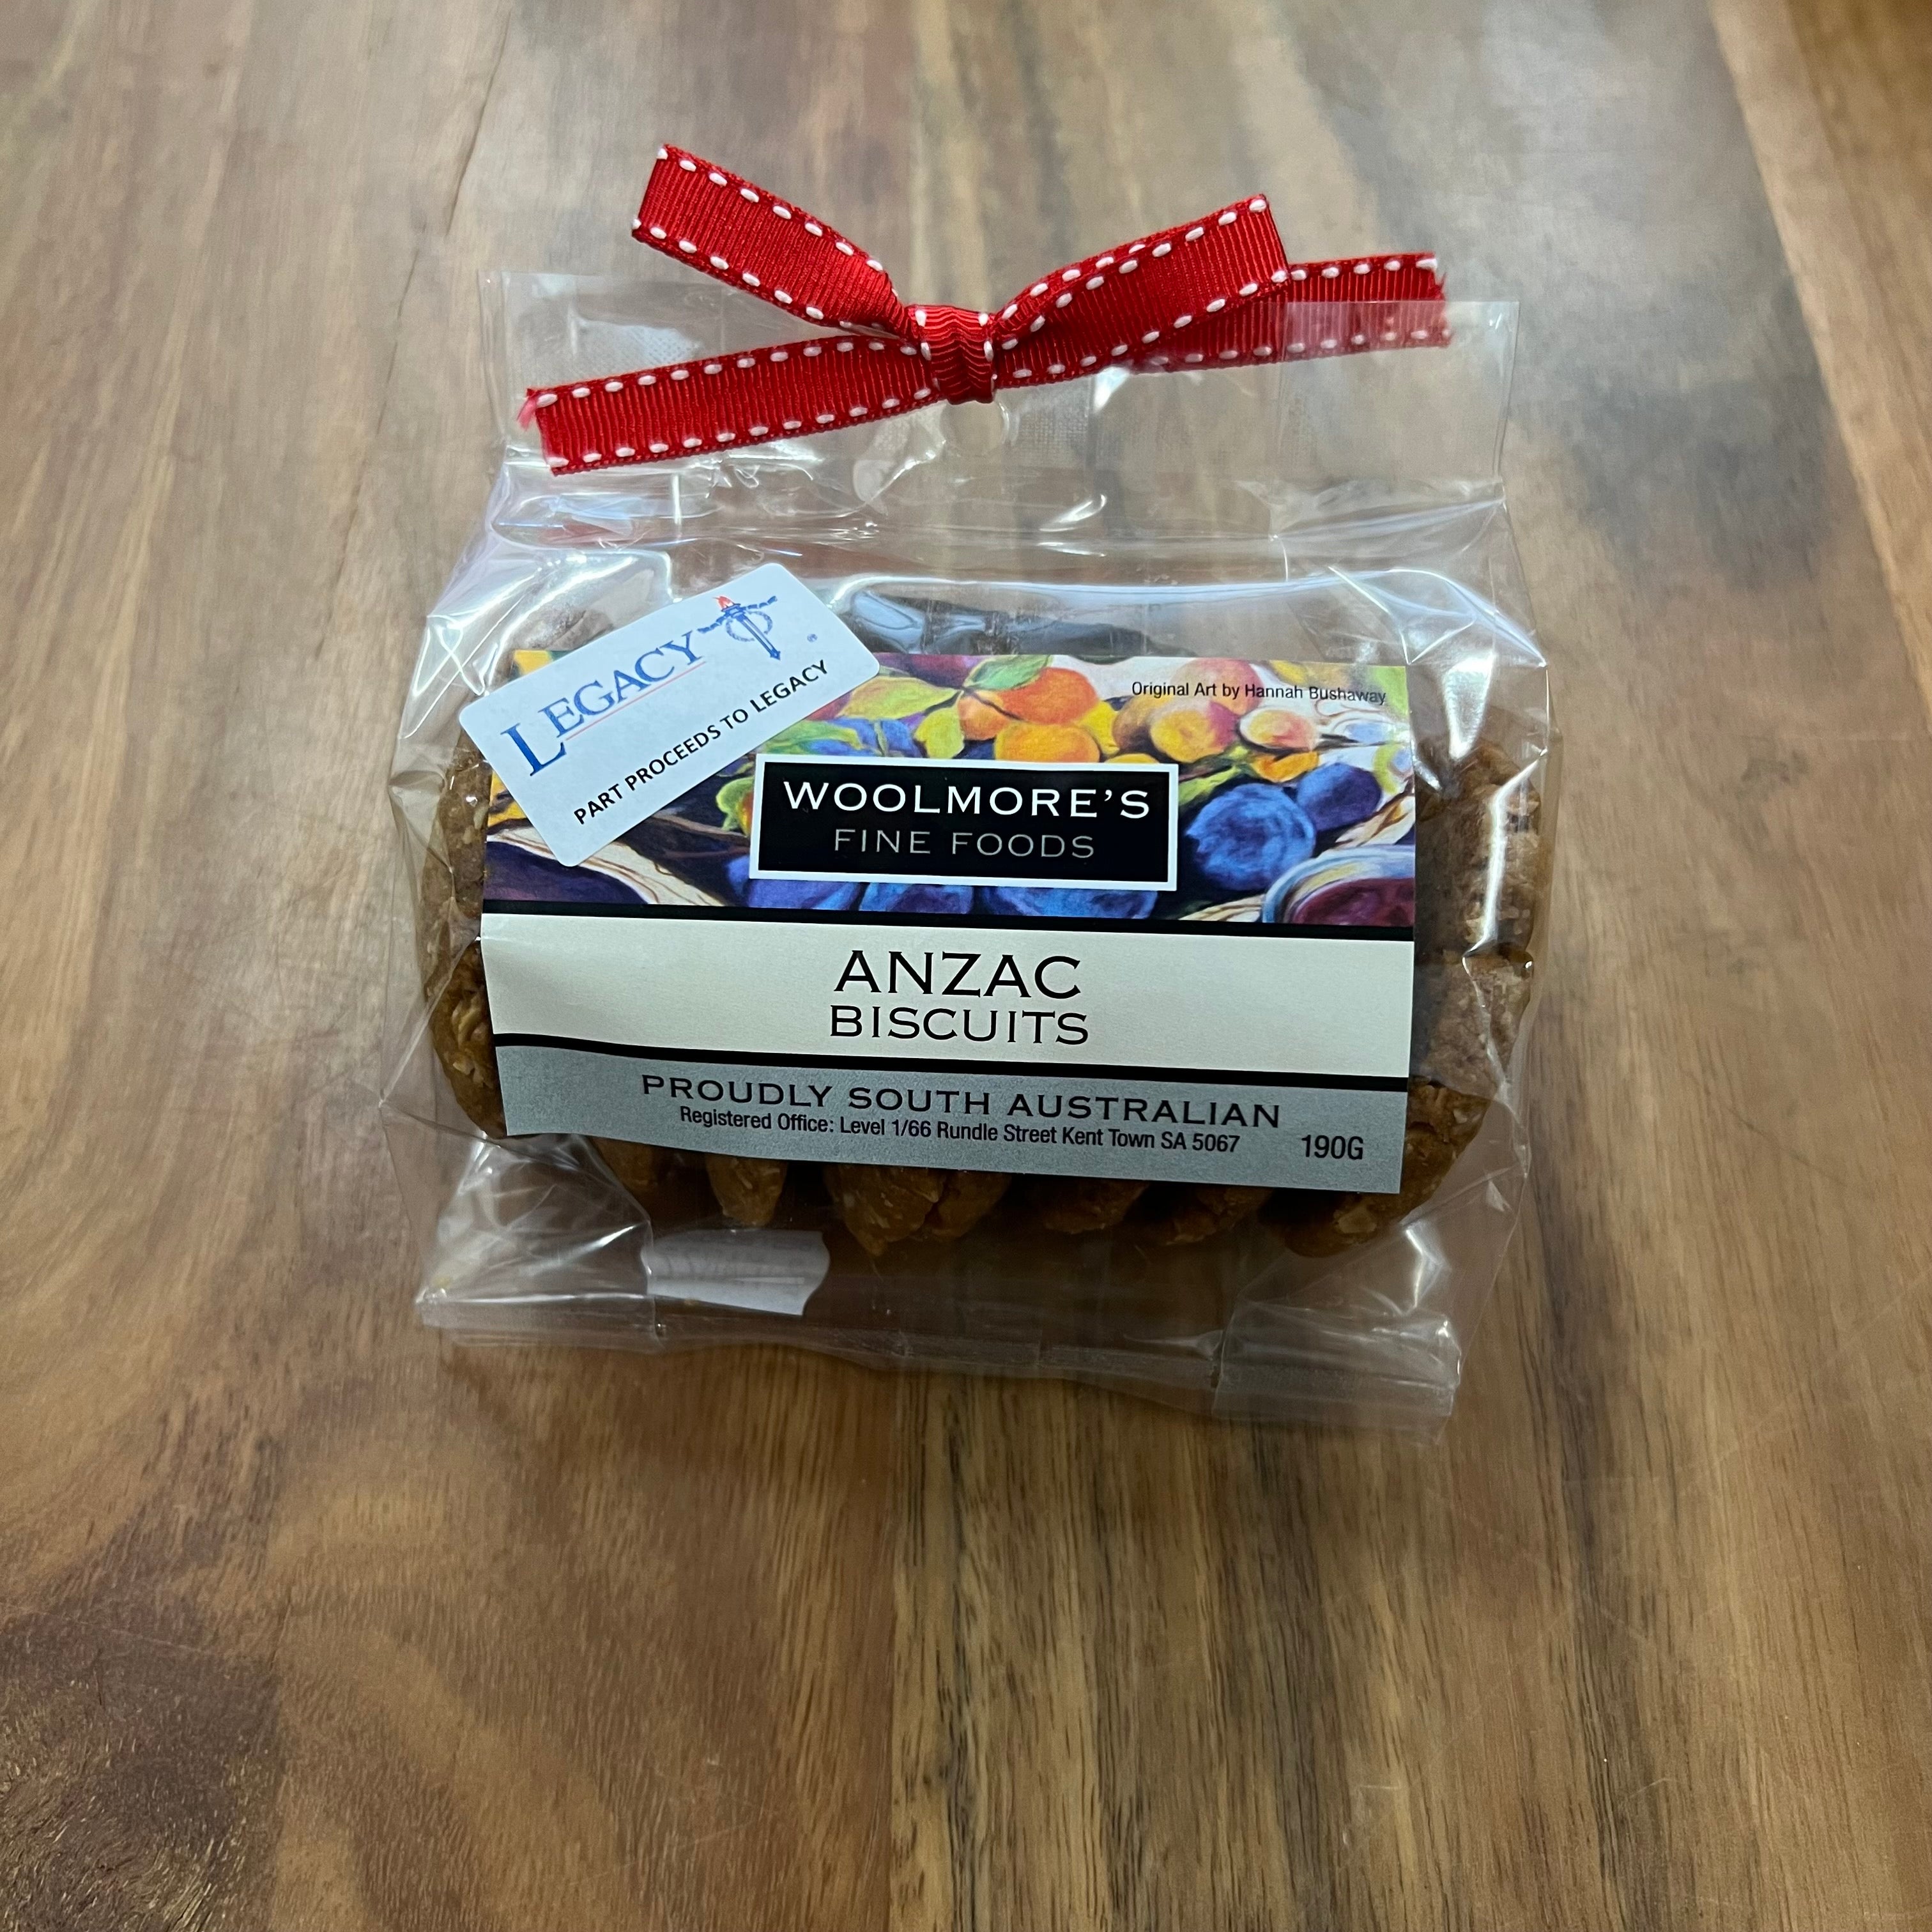 Woolmore’s Anzac Biscuits